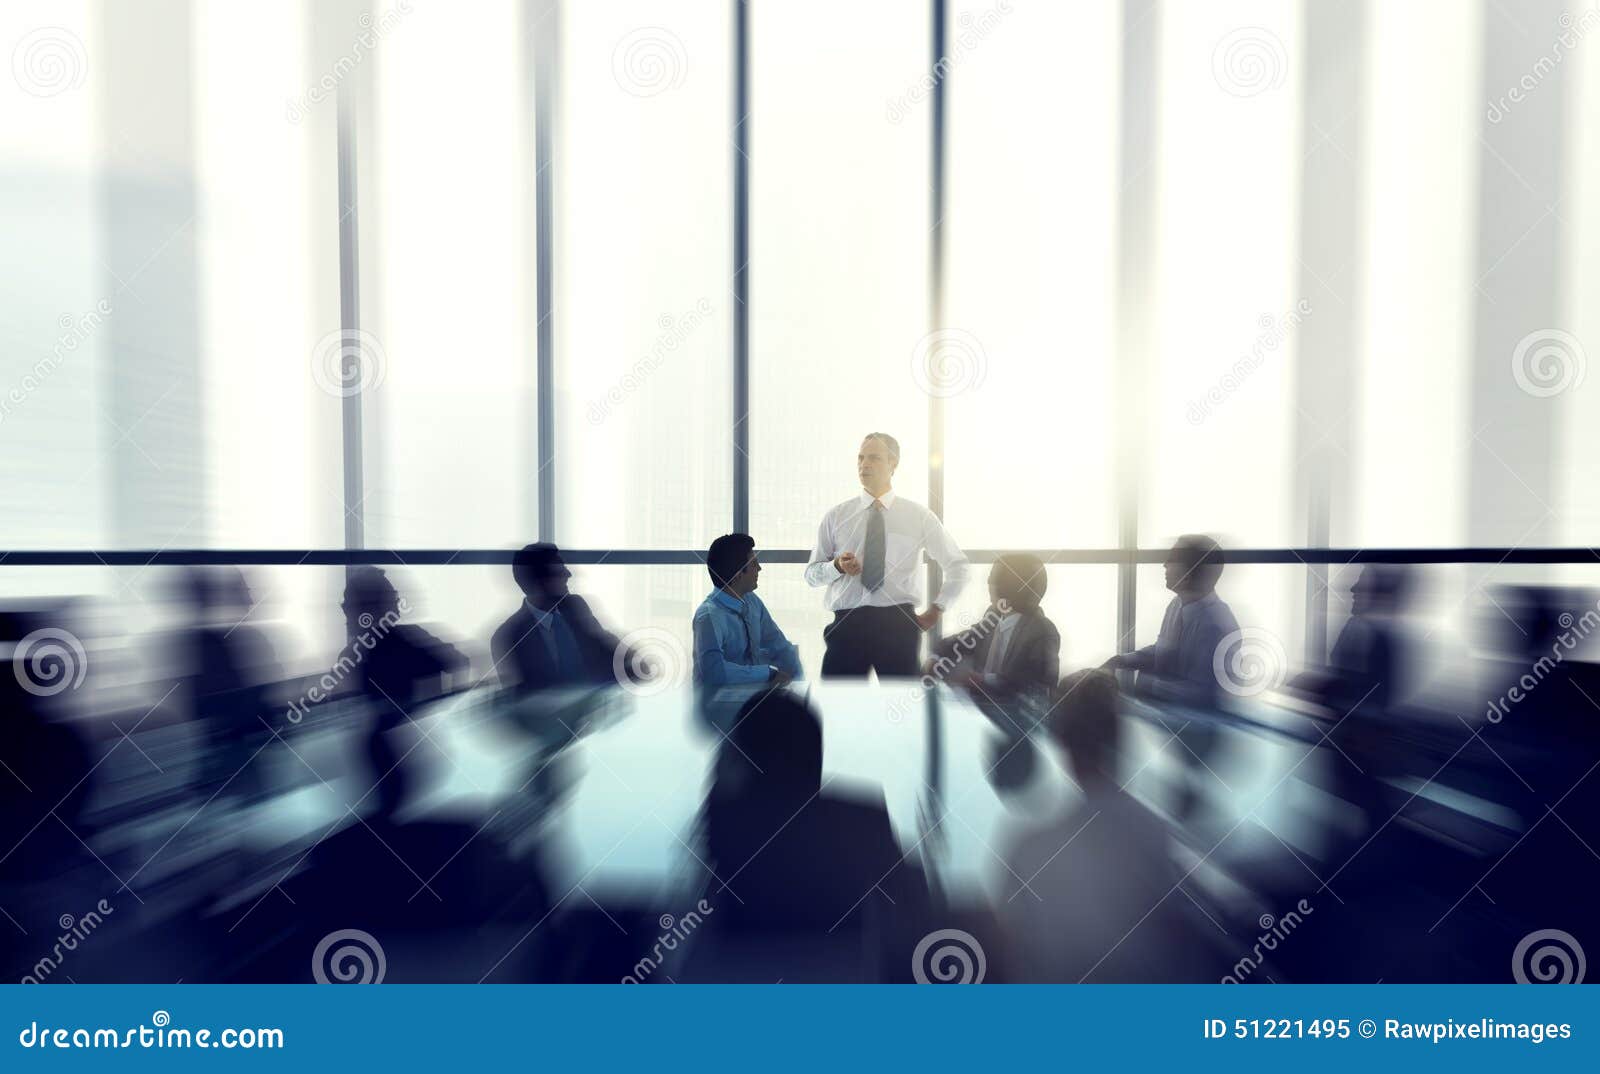 The Leader of the Business People Giving a Speech Conference Stock